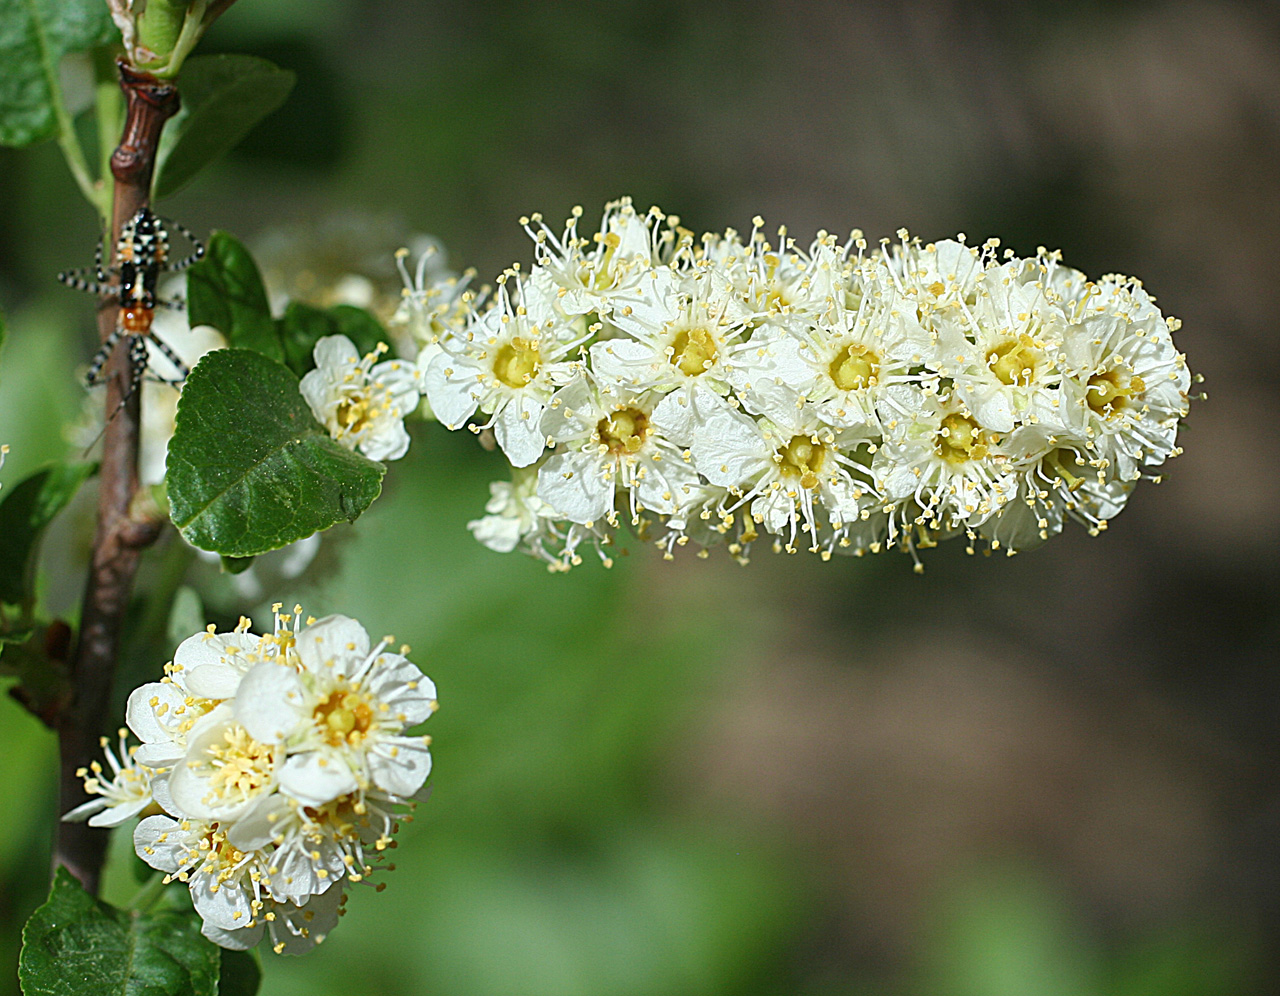 White flowers in a dense cluster